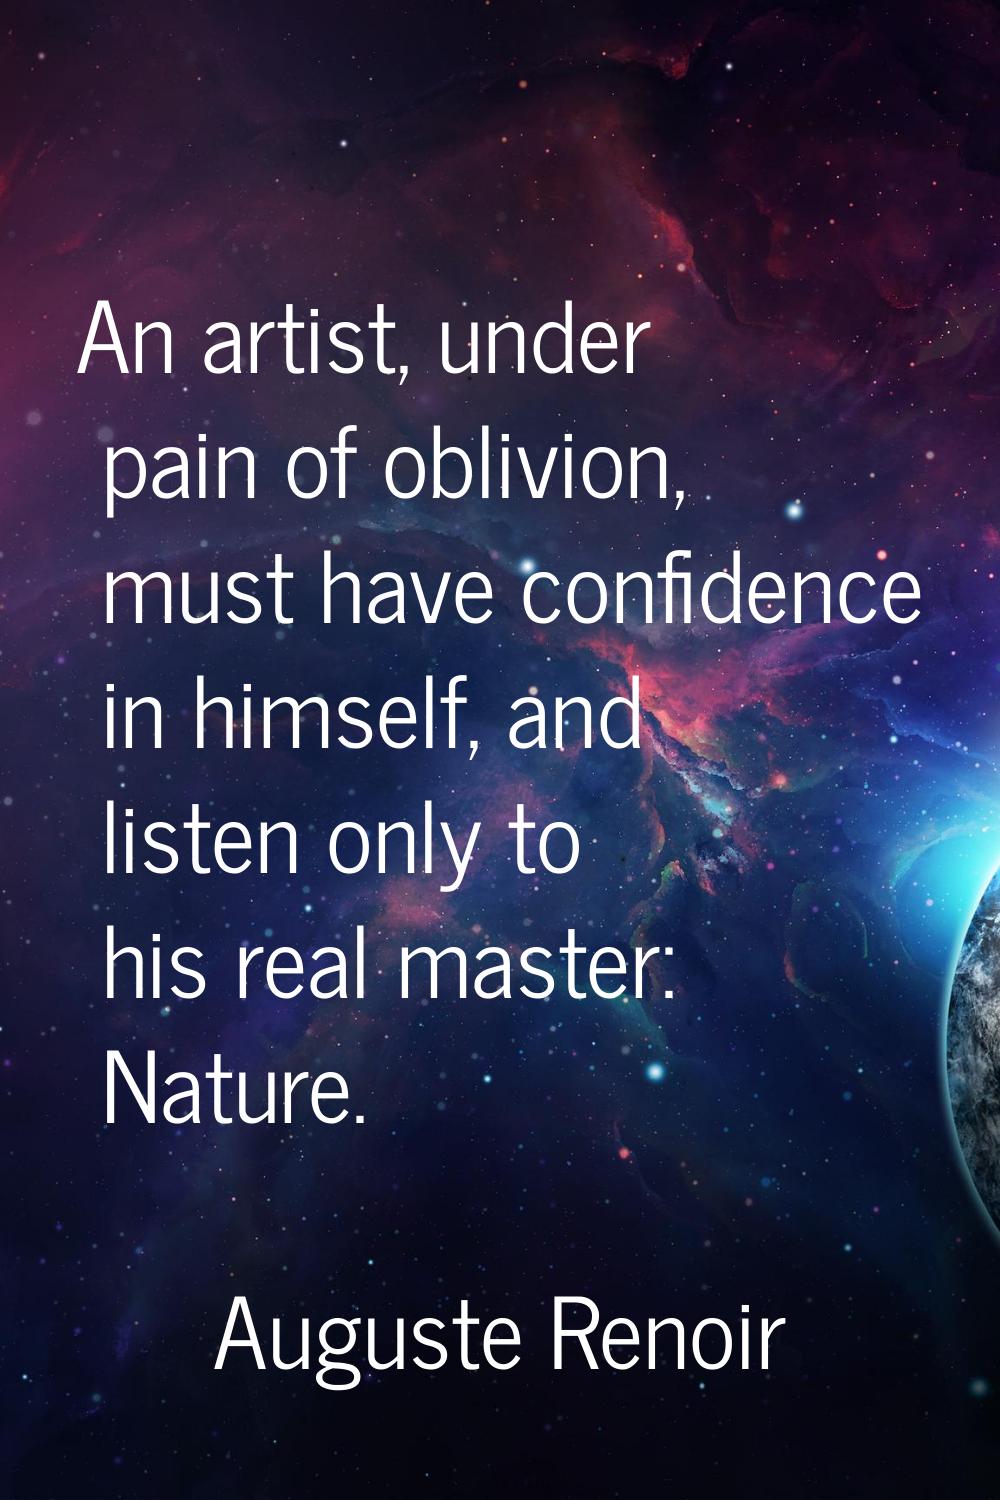 An artist, under pain of oblivion, must have confidence in himself, and listen only to his real mas